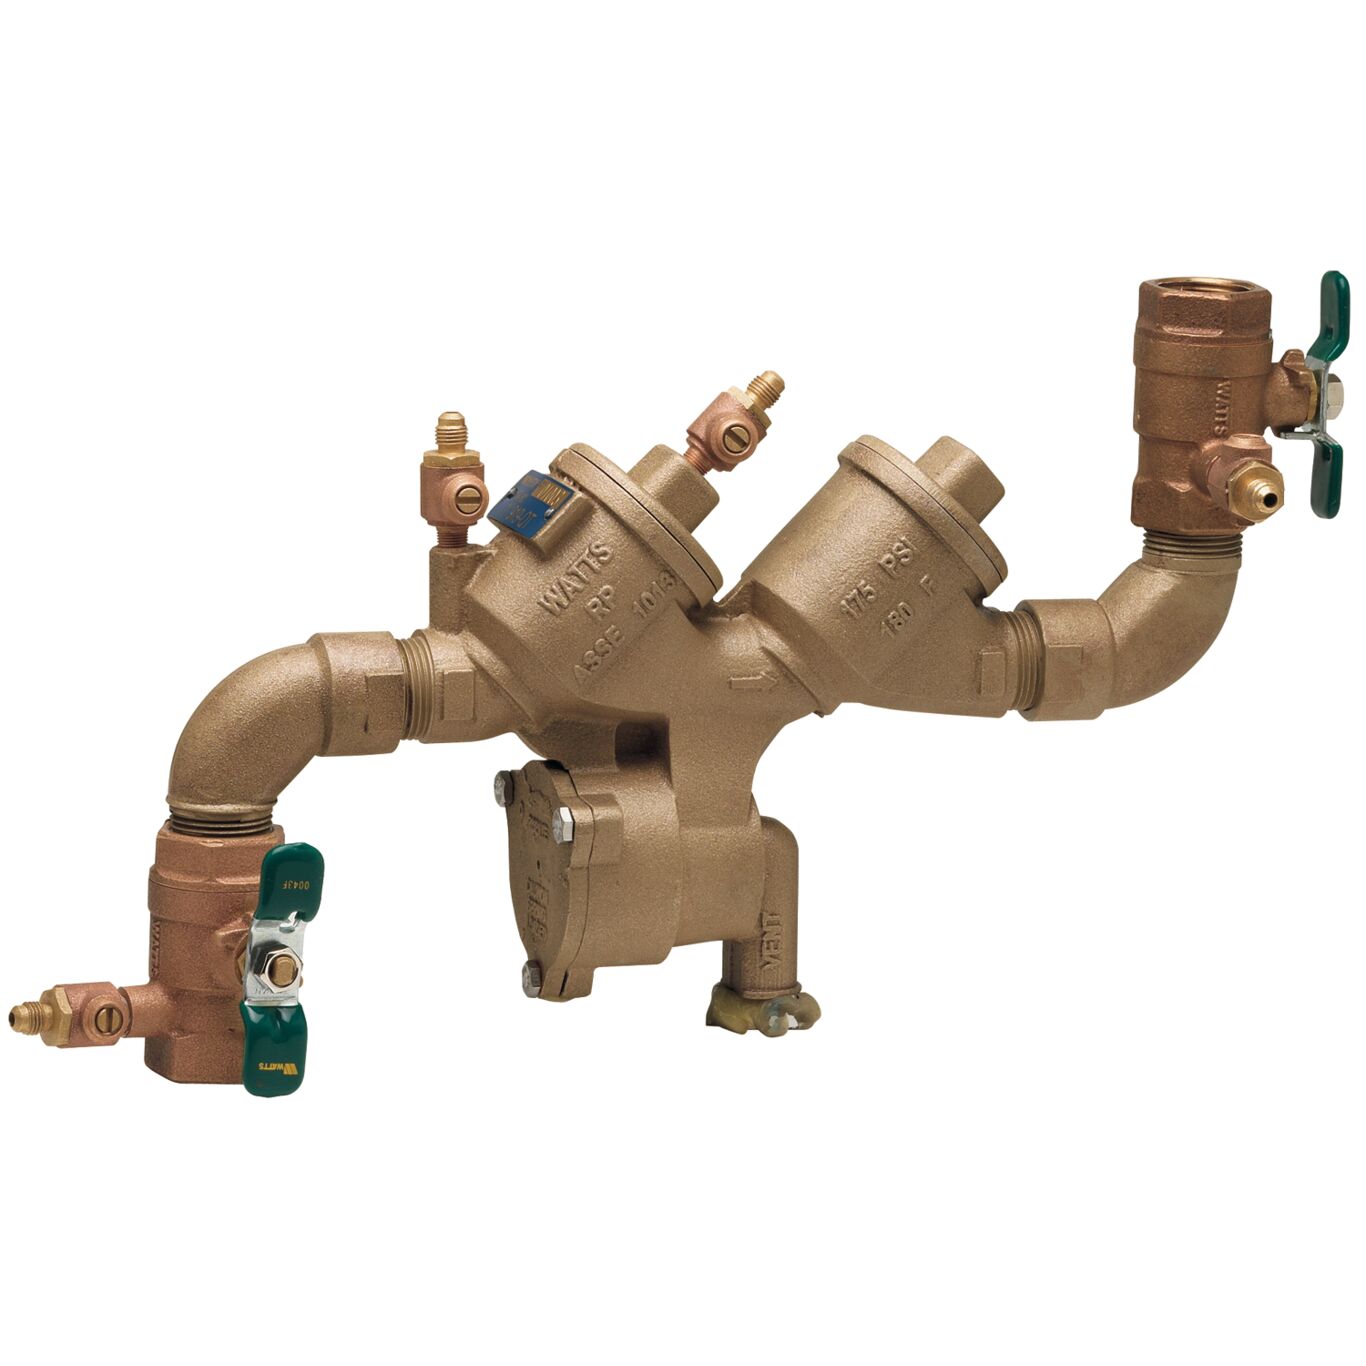 Product Image - Bronze Reduced Pressure Zone Backflow Preventer Assembly, Quarter Turn Shutoff, Inlet And Outlet Flow Up